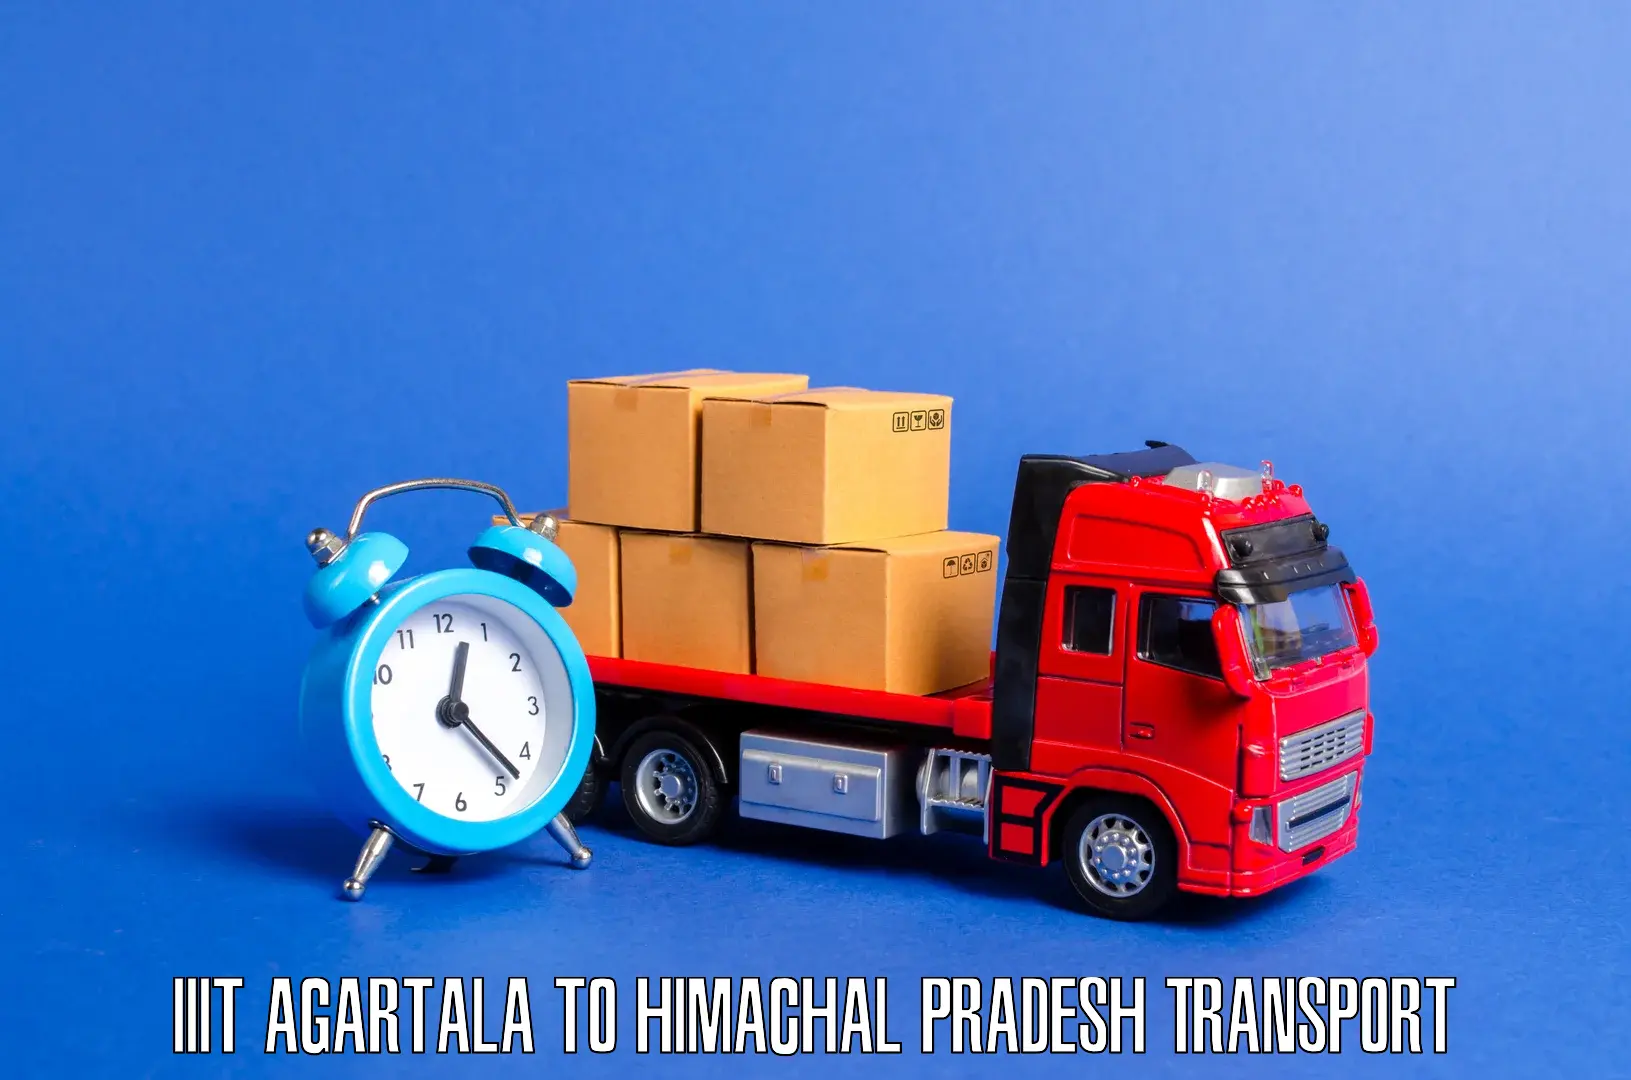 Interstate transport services IIIT Agartala to Reckong Peo